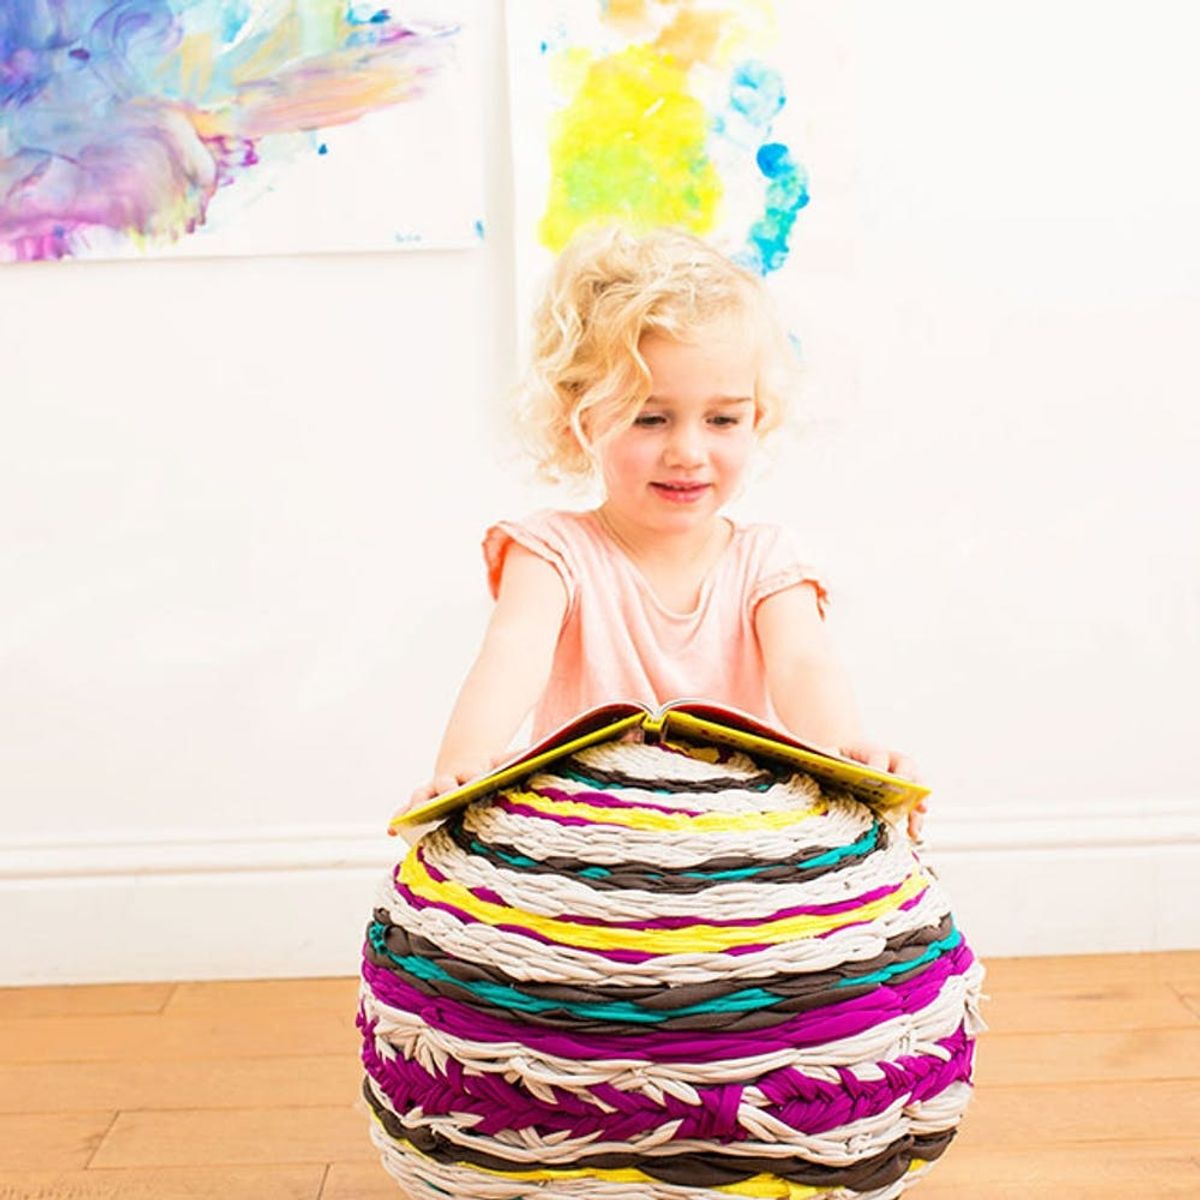 From Baby to Big Kid: 15 Nursery Items That Will Grow With Them